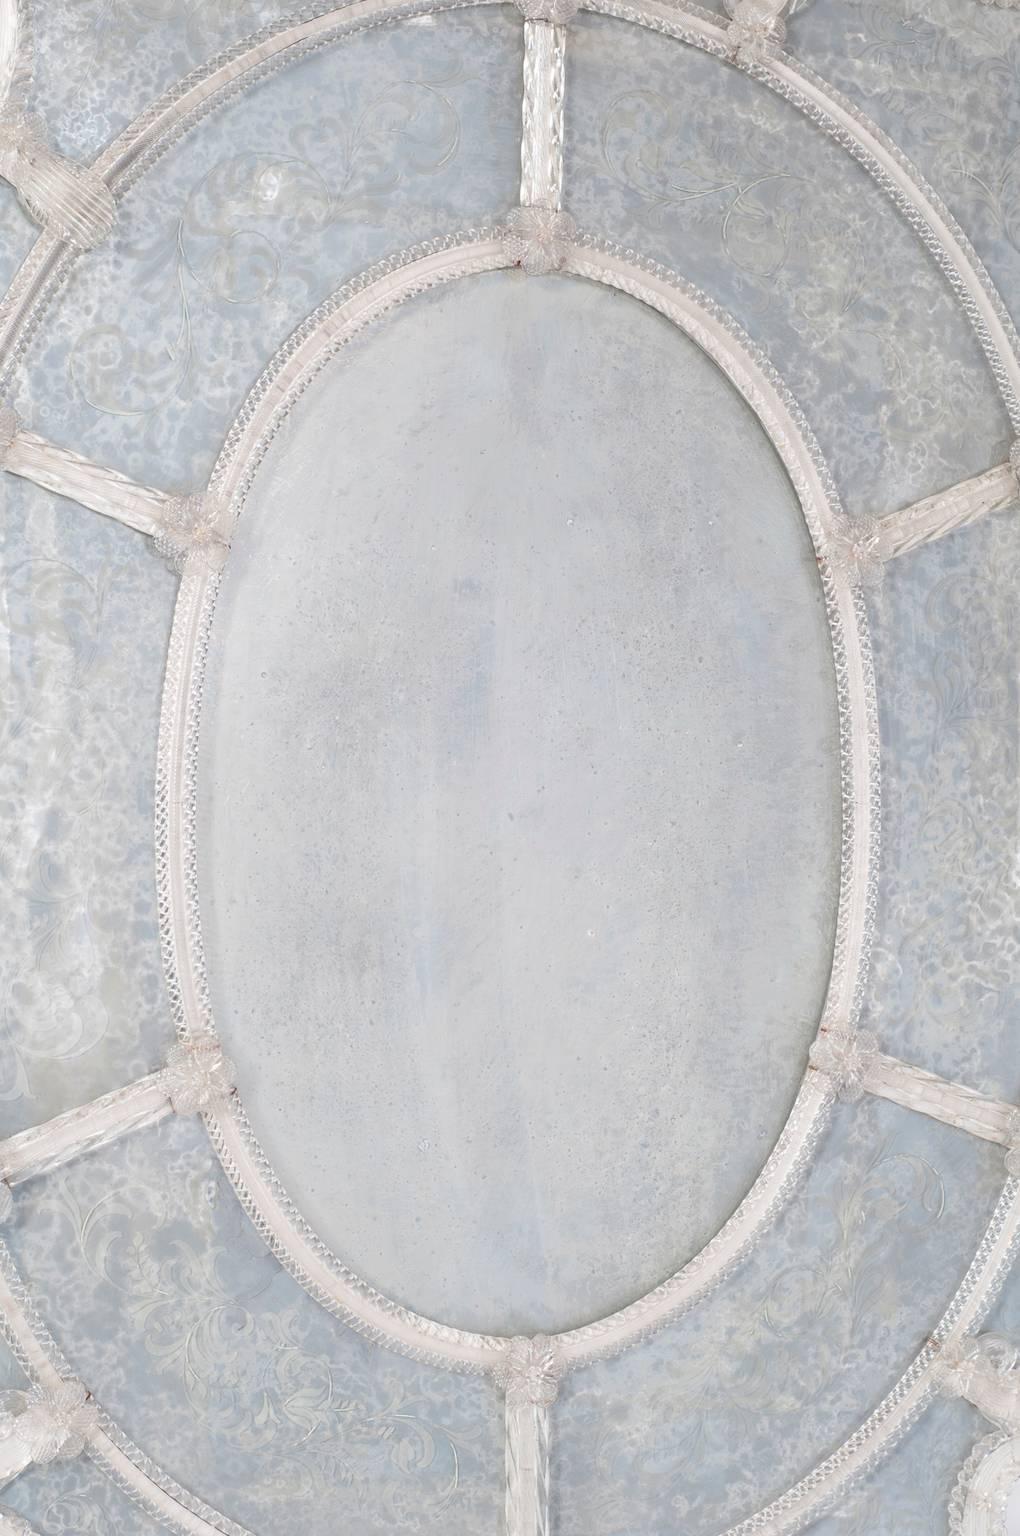 Italian Murano Glass Mirror 19th Century Attributed to Pauly & Co. In Excellent Condition For Sale In Villaverla, IT